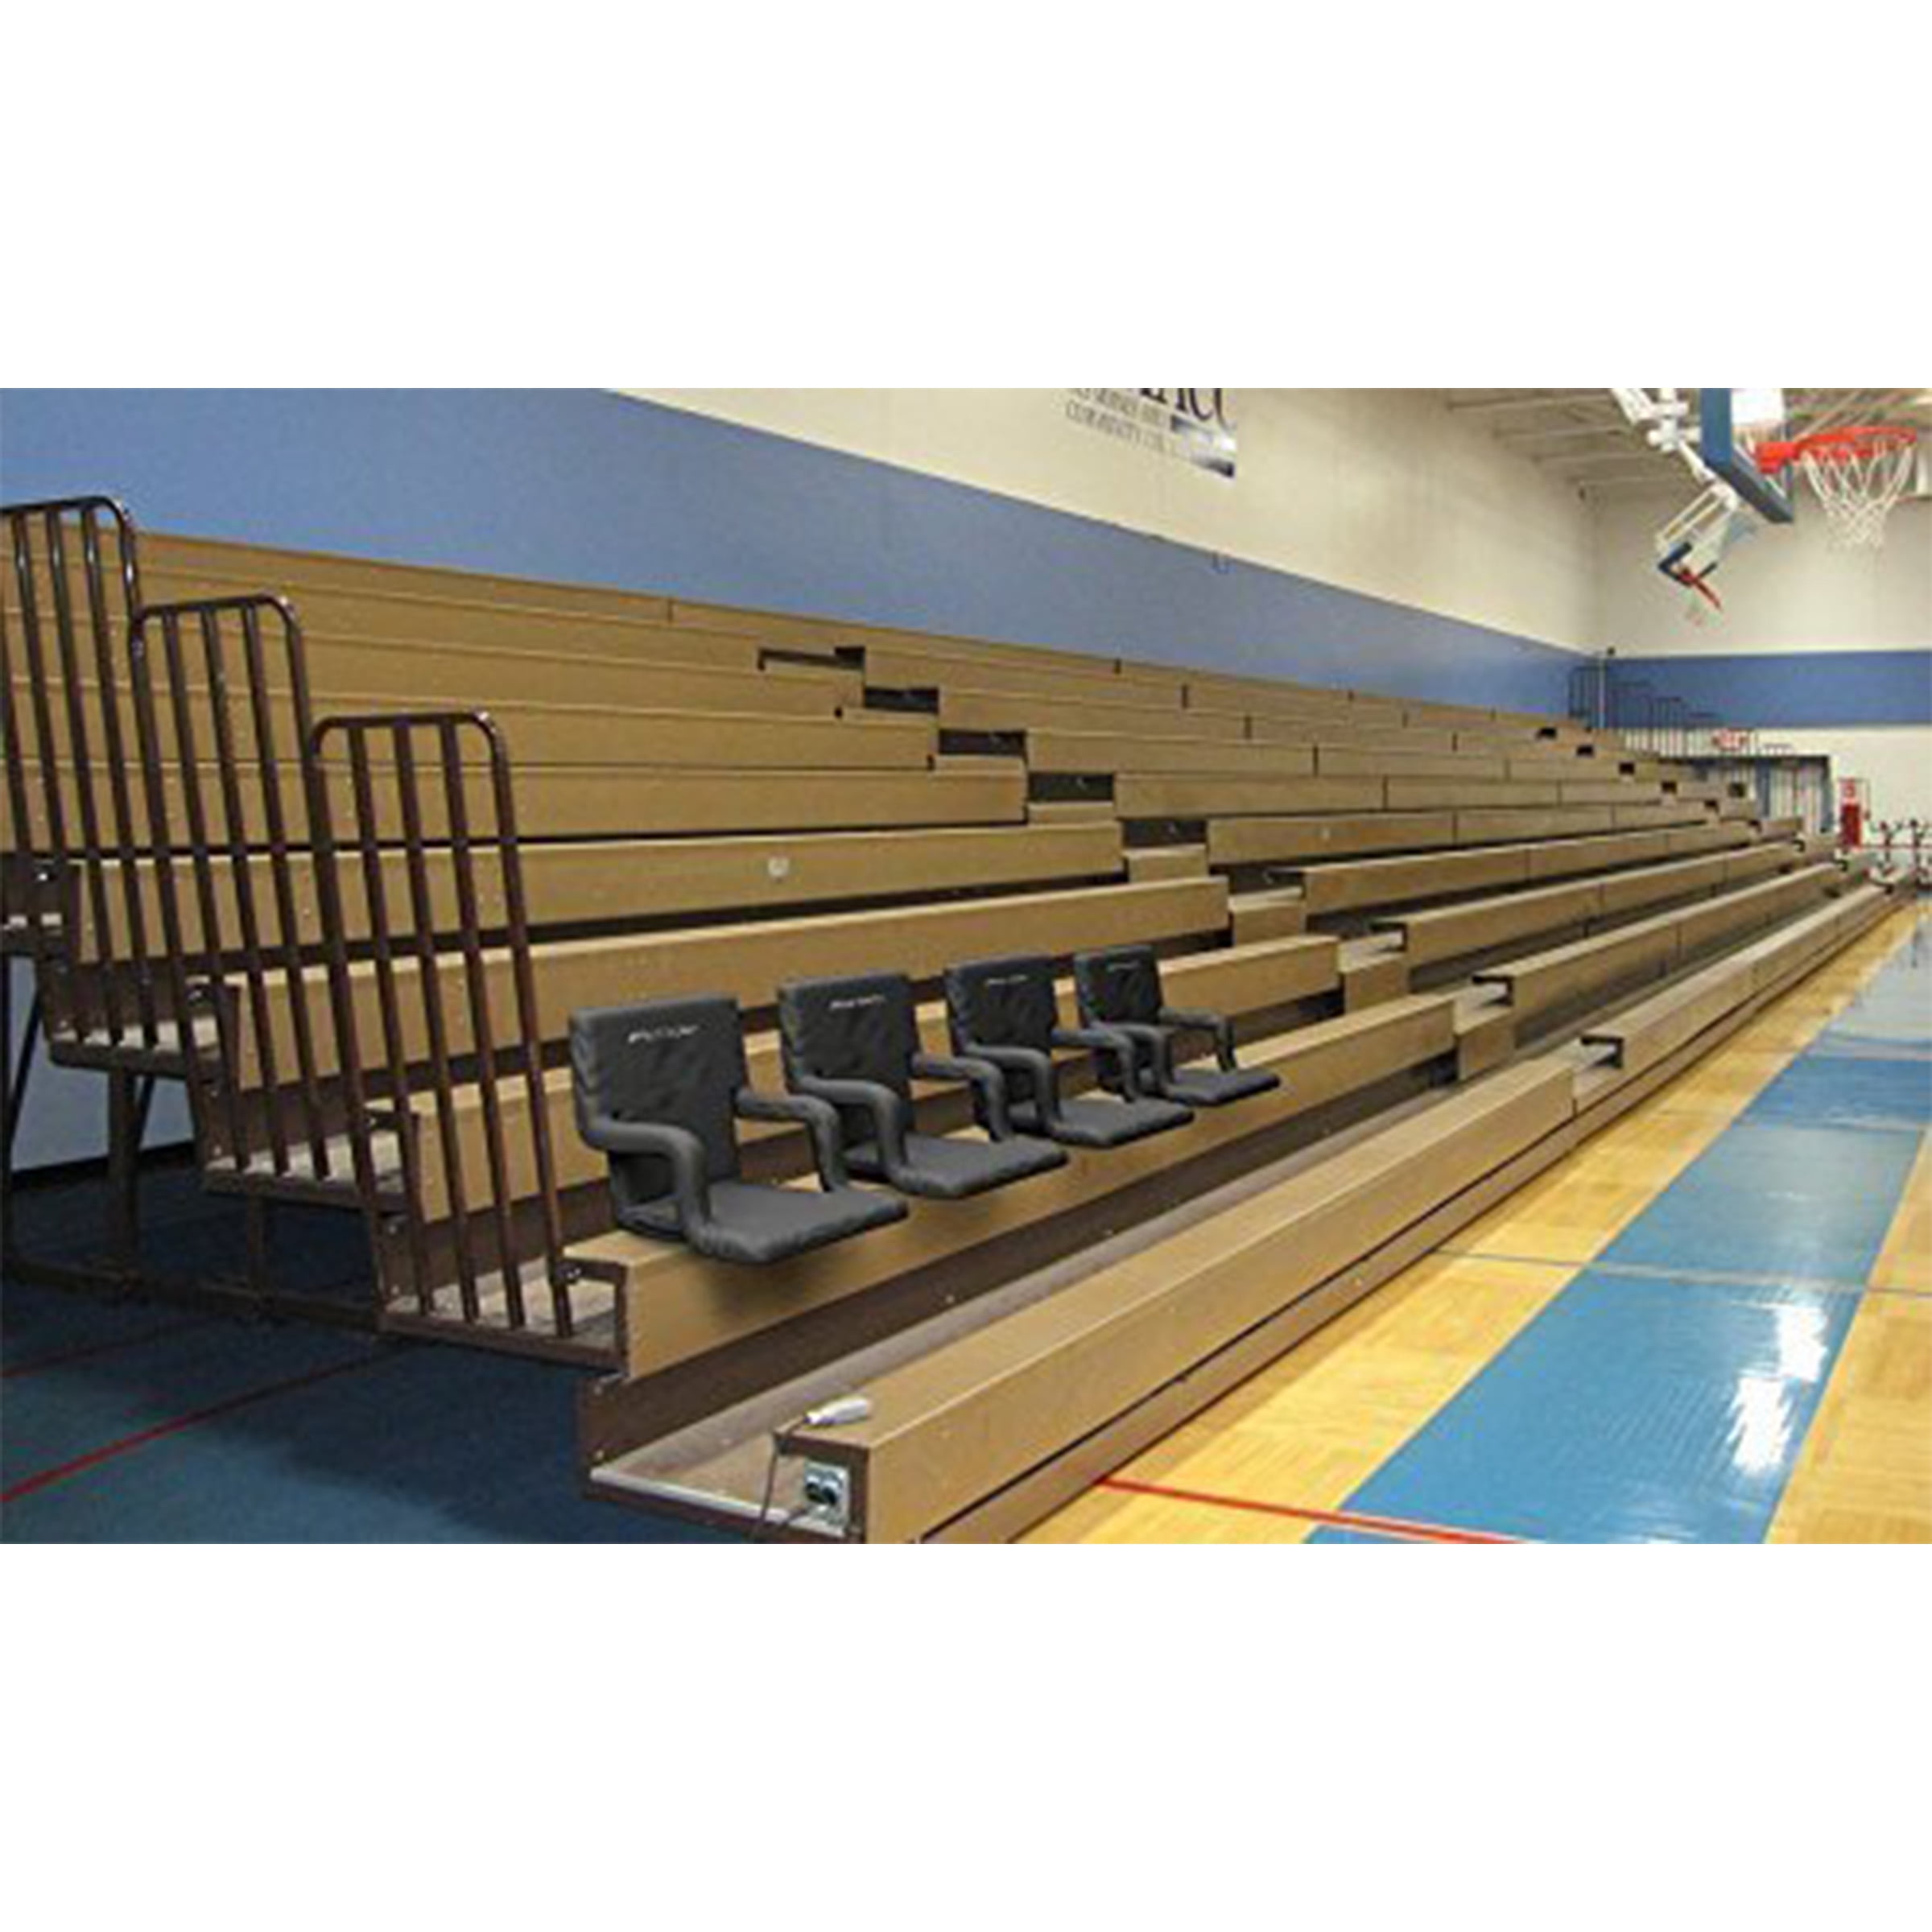 Home-Complete Stadium Seating Bleacher Cushion Chair & Back Support